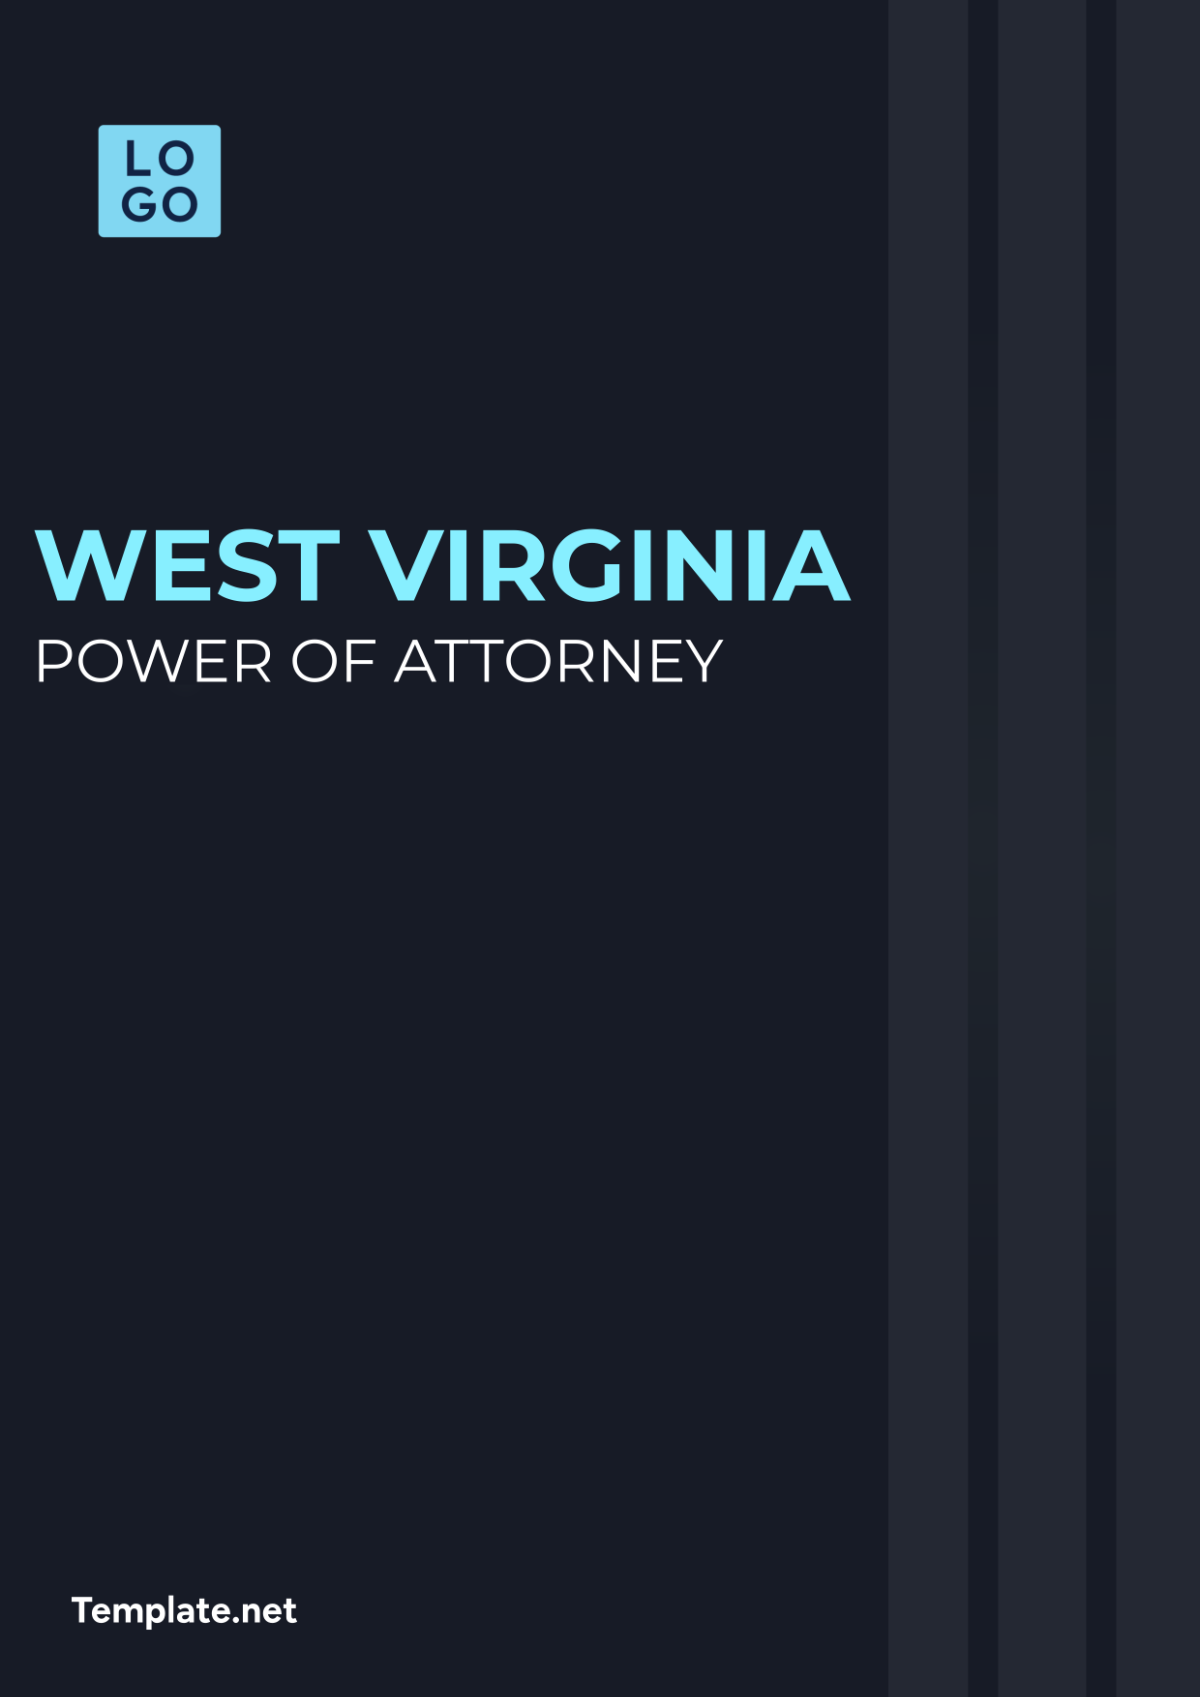 West Virginia Power of Attorney Template